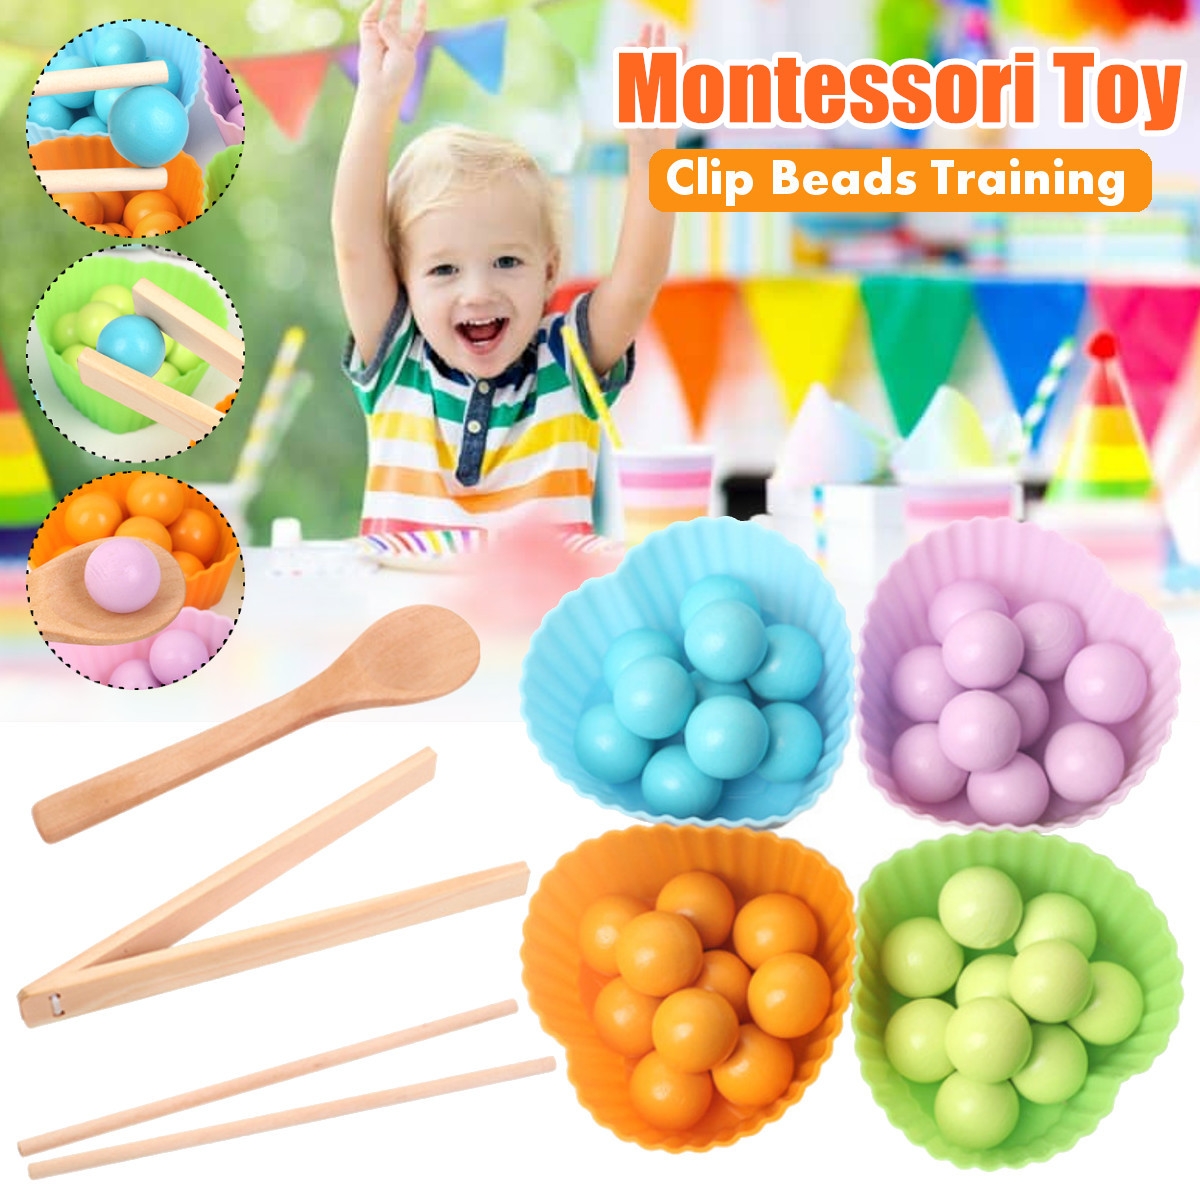 Early Learning Hands Brain Clip Beads Training Educational Montessori Color Sorting Wooden Toys for Children